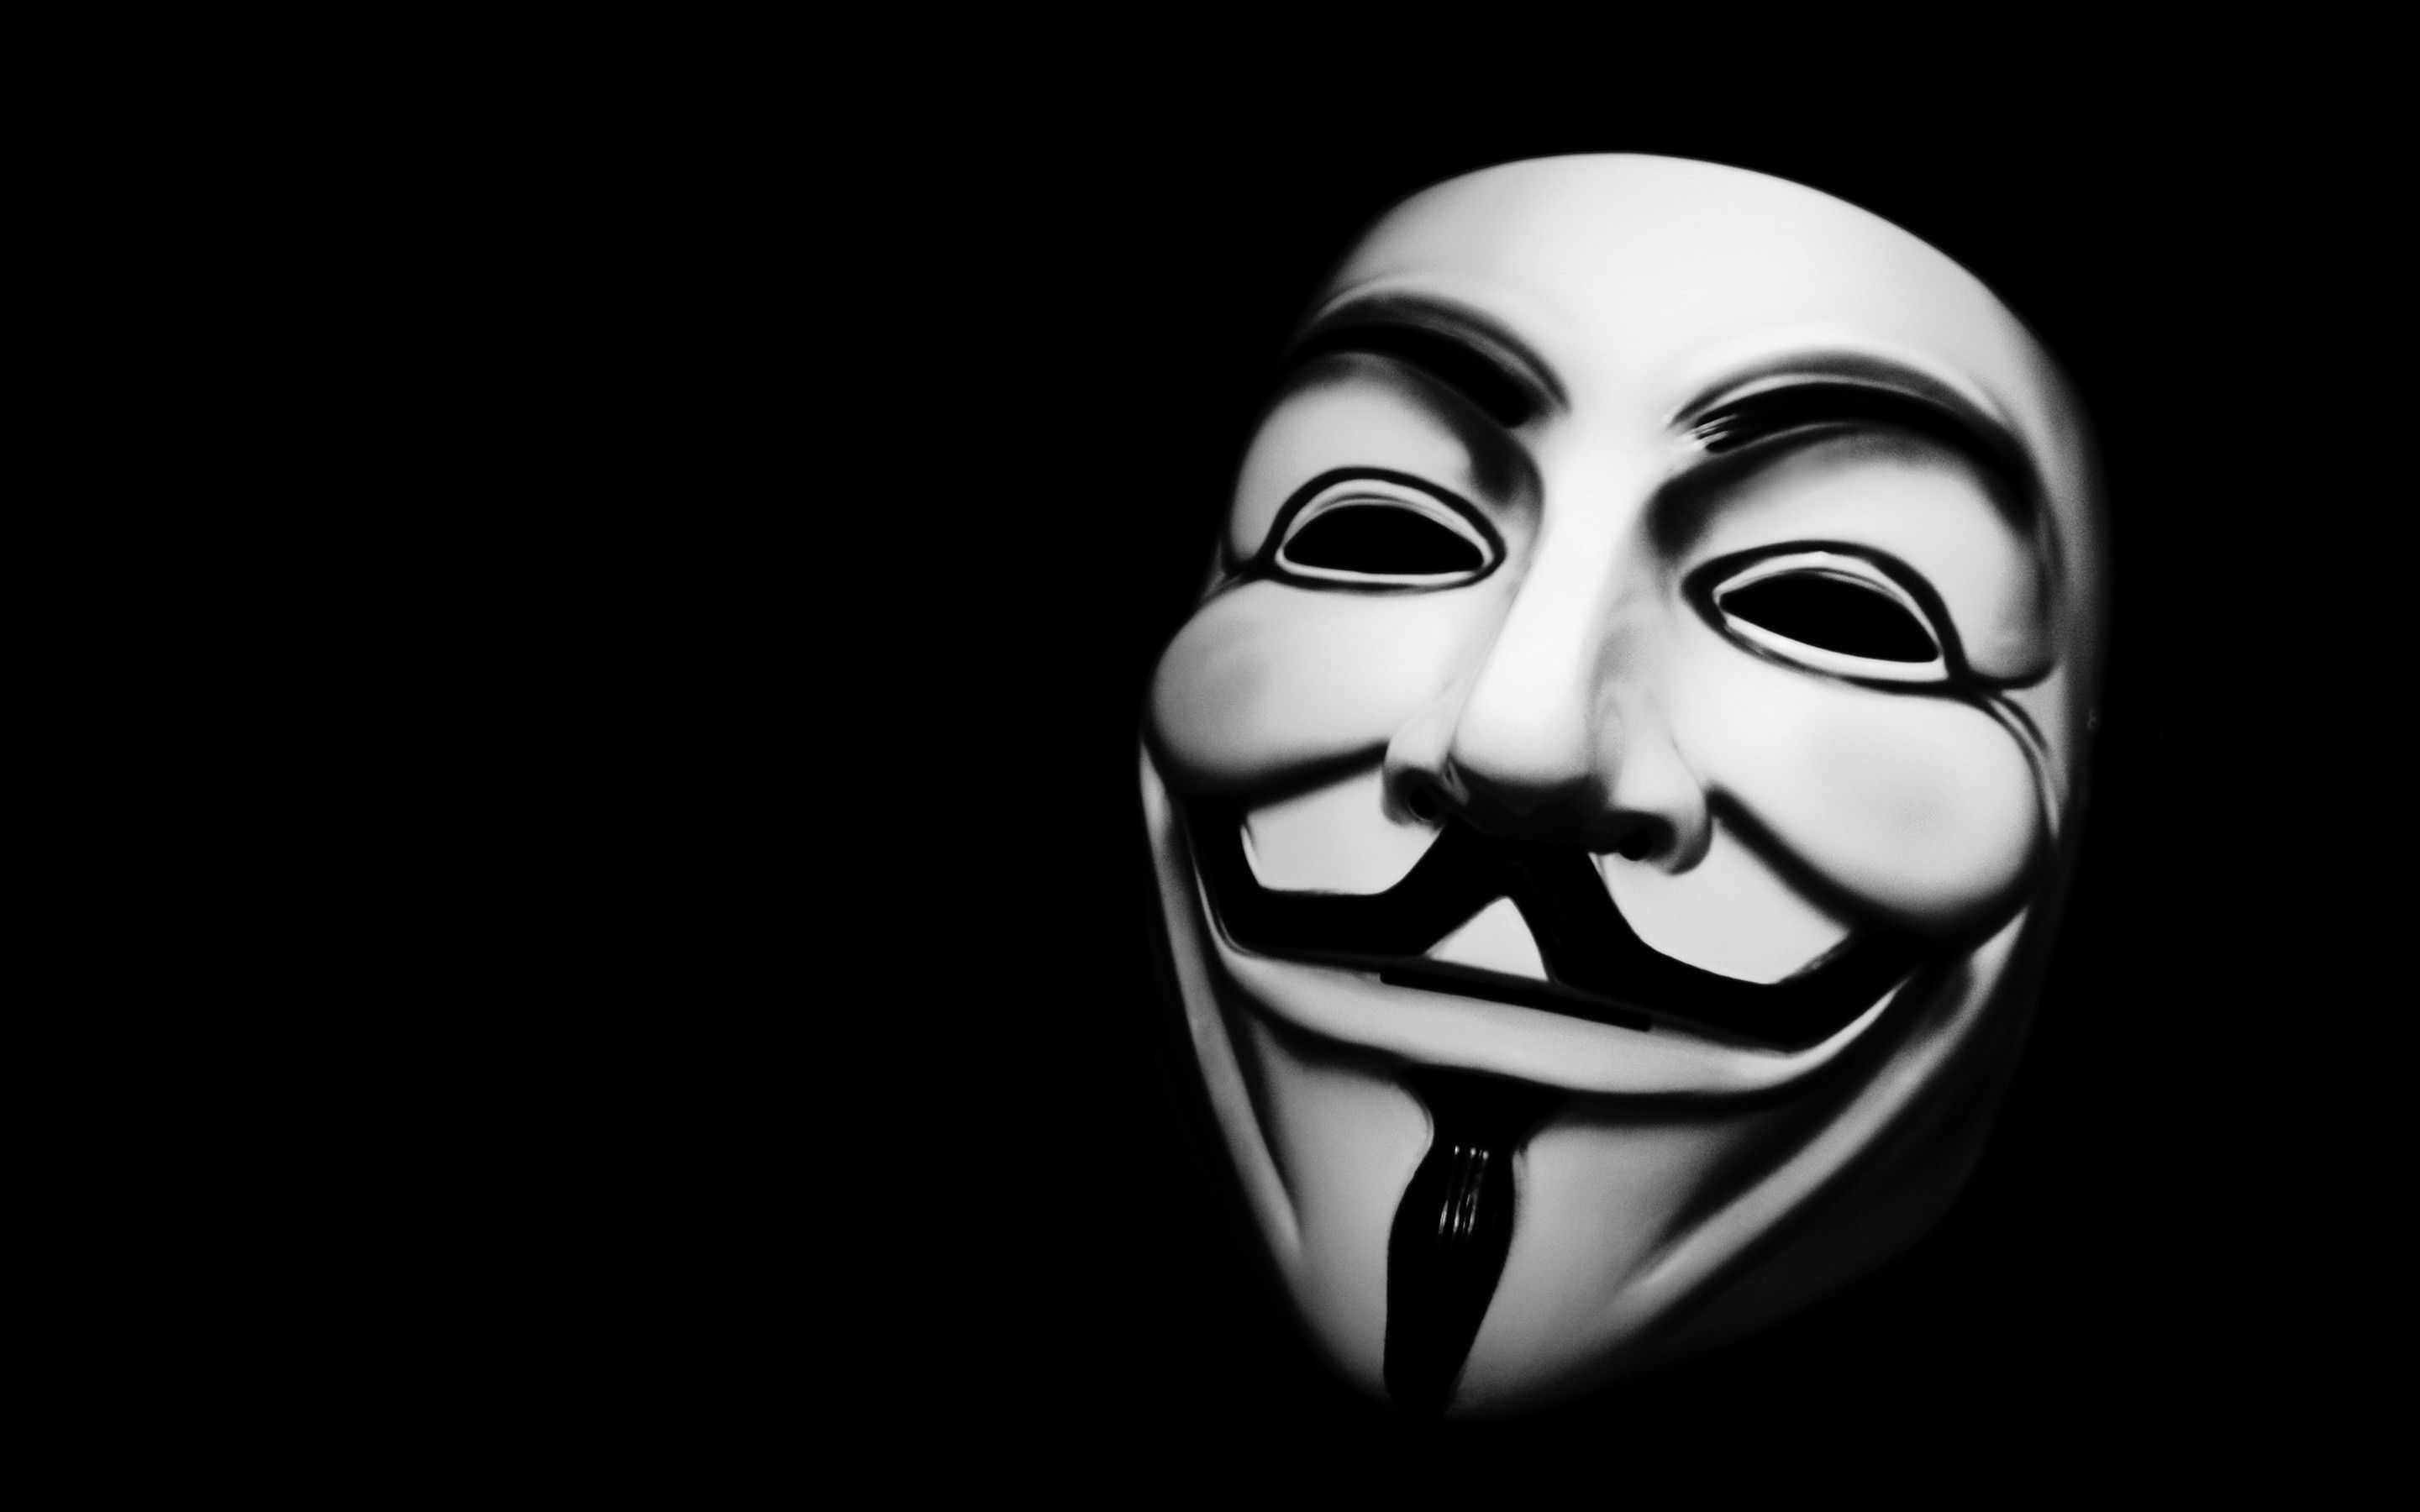 HD Anonymous Mask Wallpaper Picture Cool 1080p Windows Wallpaper